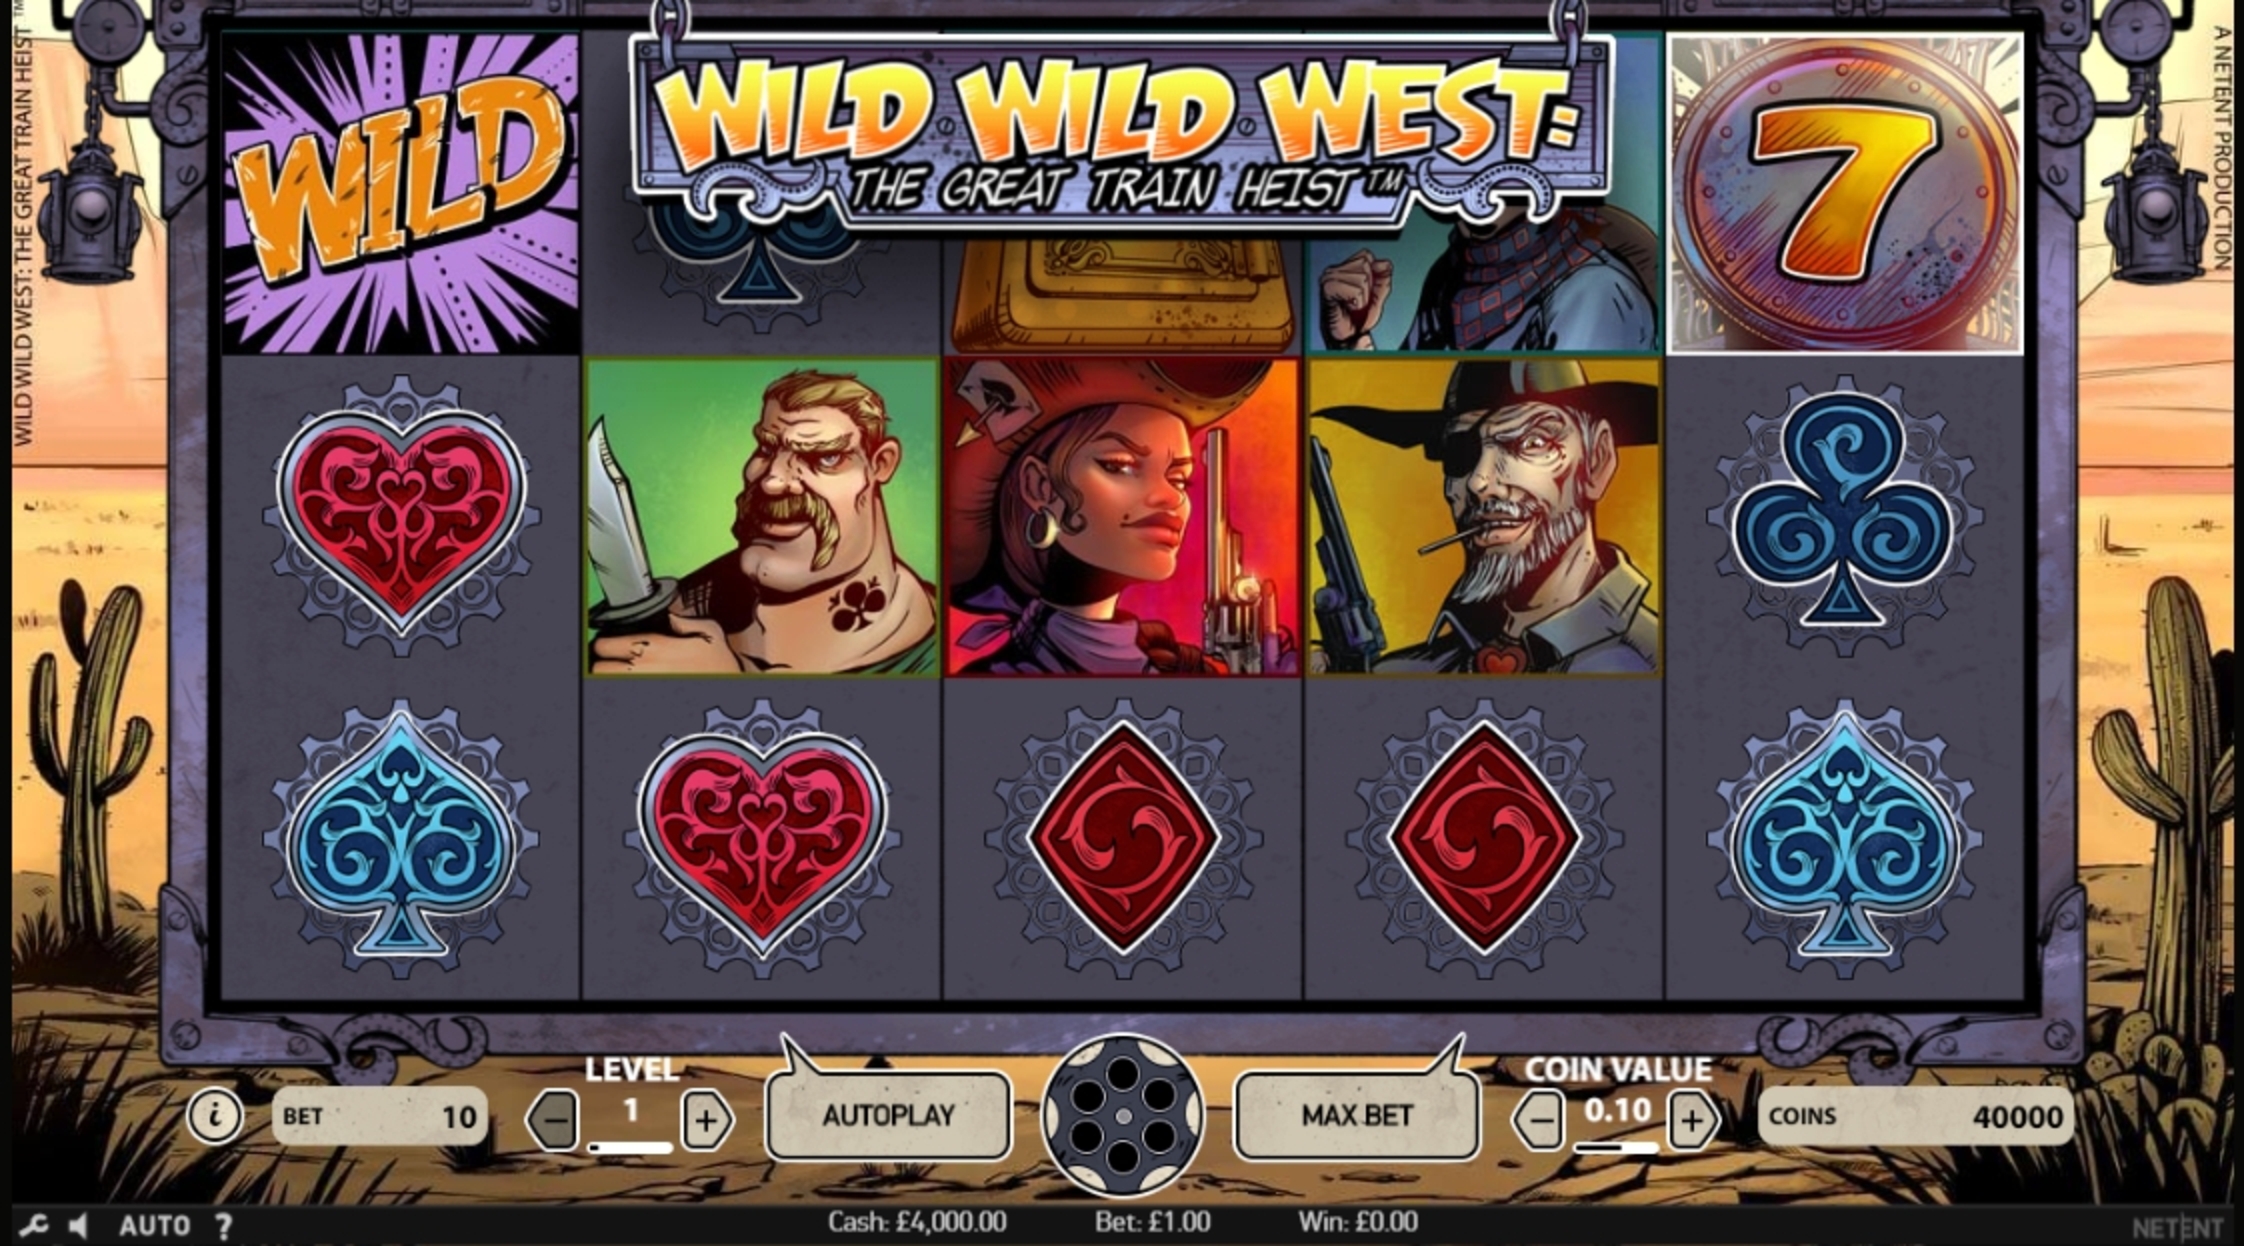 Reels in Wild Wild West Slot Game by NetEnt